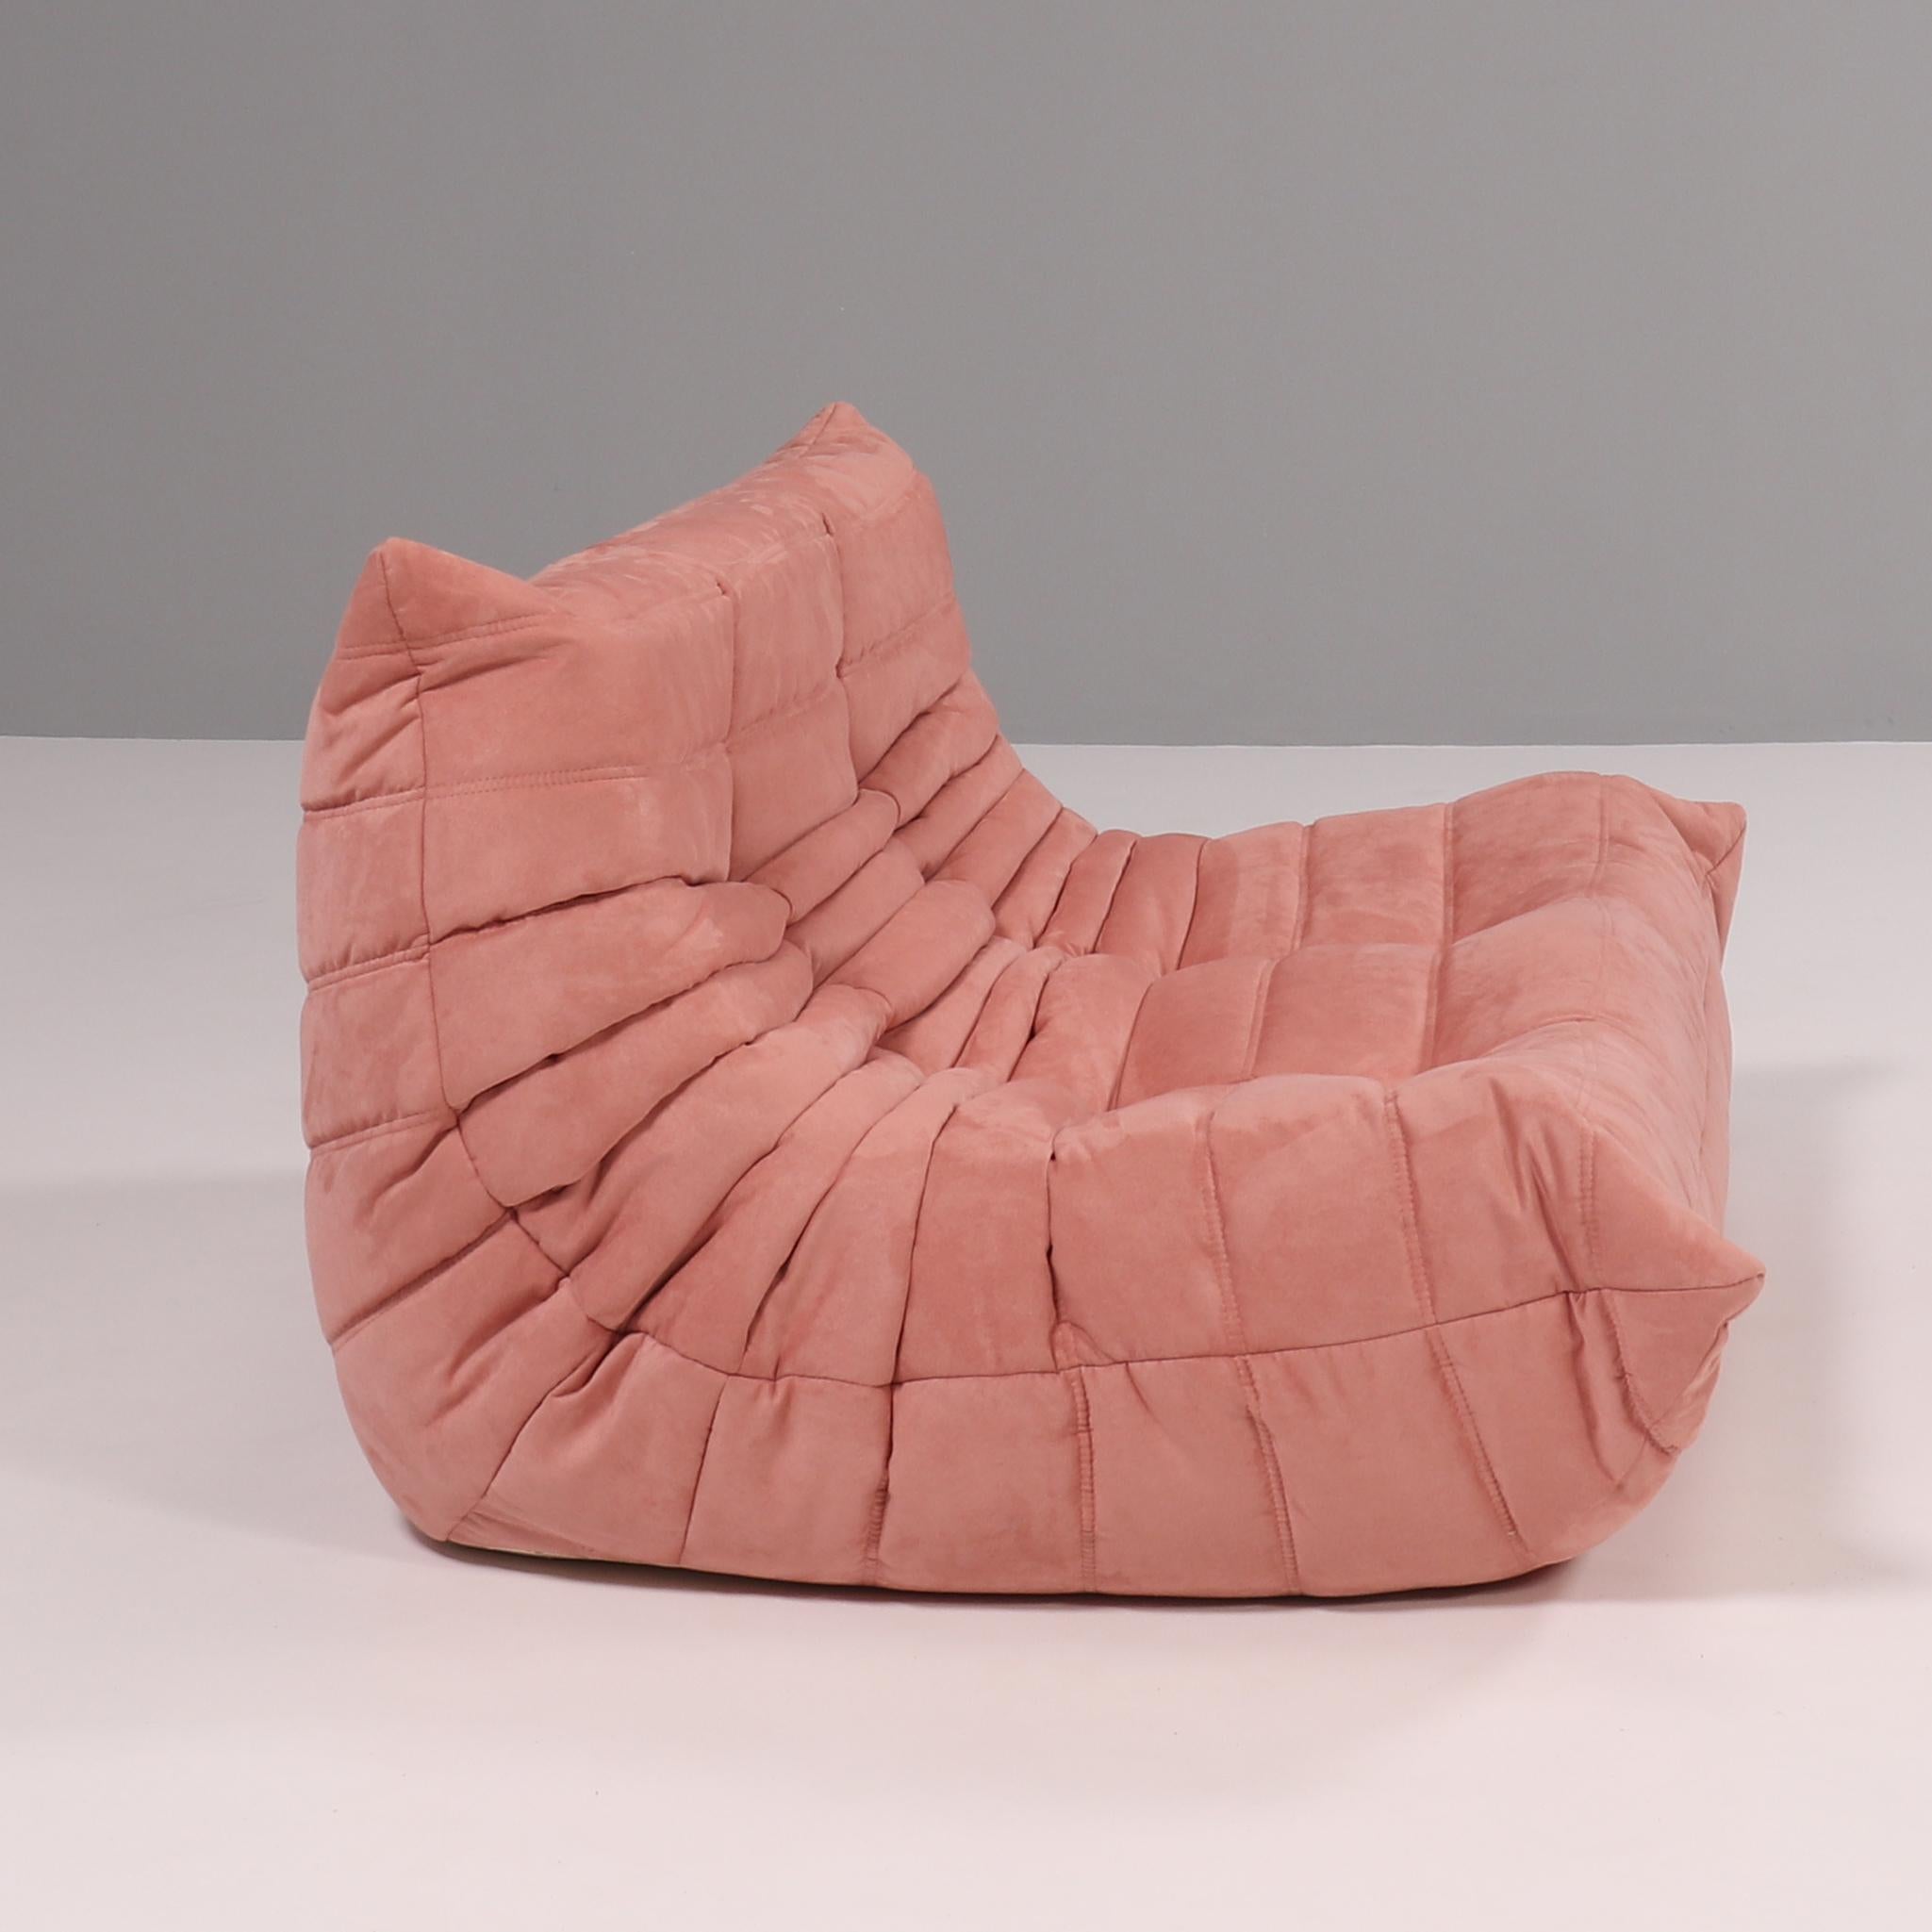 The iconic Togo sofa, originally designed by Michel Ducaroy for Ligne Roset in 1973 has become a design Classic.

The sofa features the original pink upholstery and the instantly recognizable pleated fabric design, which gives the sofa its relaxed